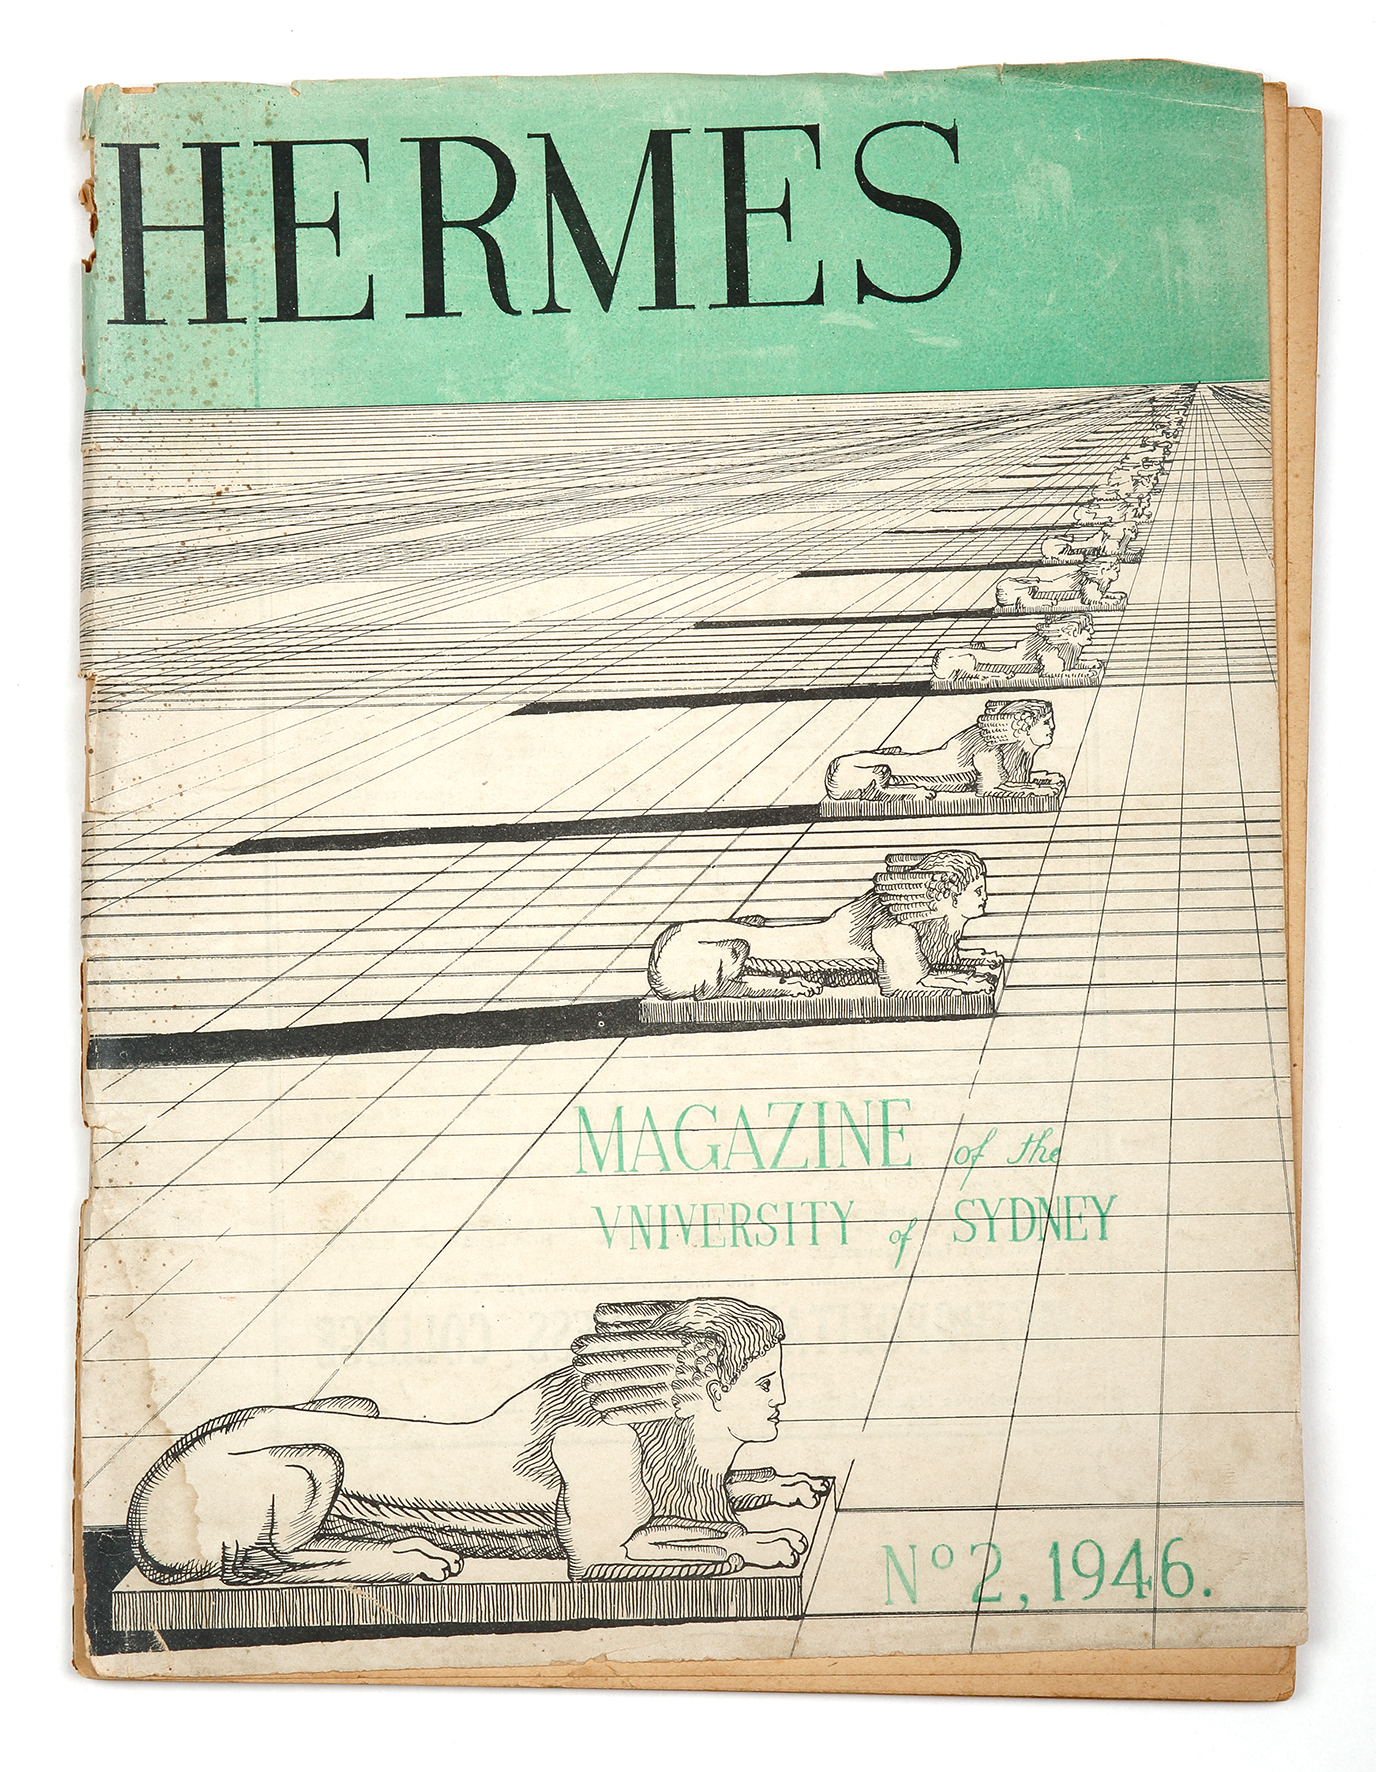 Hermes Magazine of the University of Sydney No 2, 1946 - Vintage Book from 1946